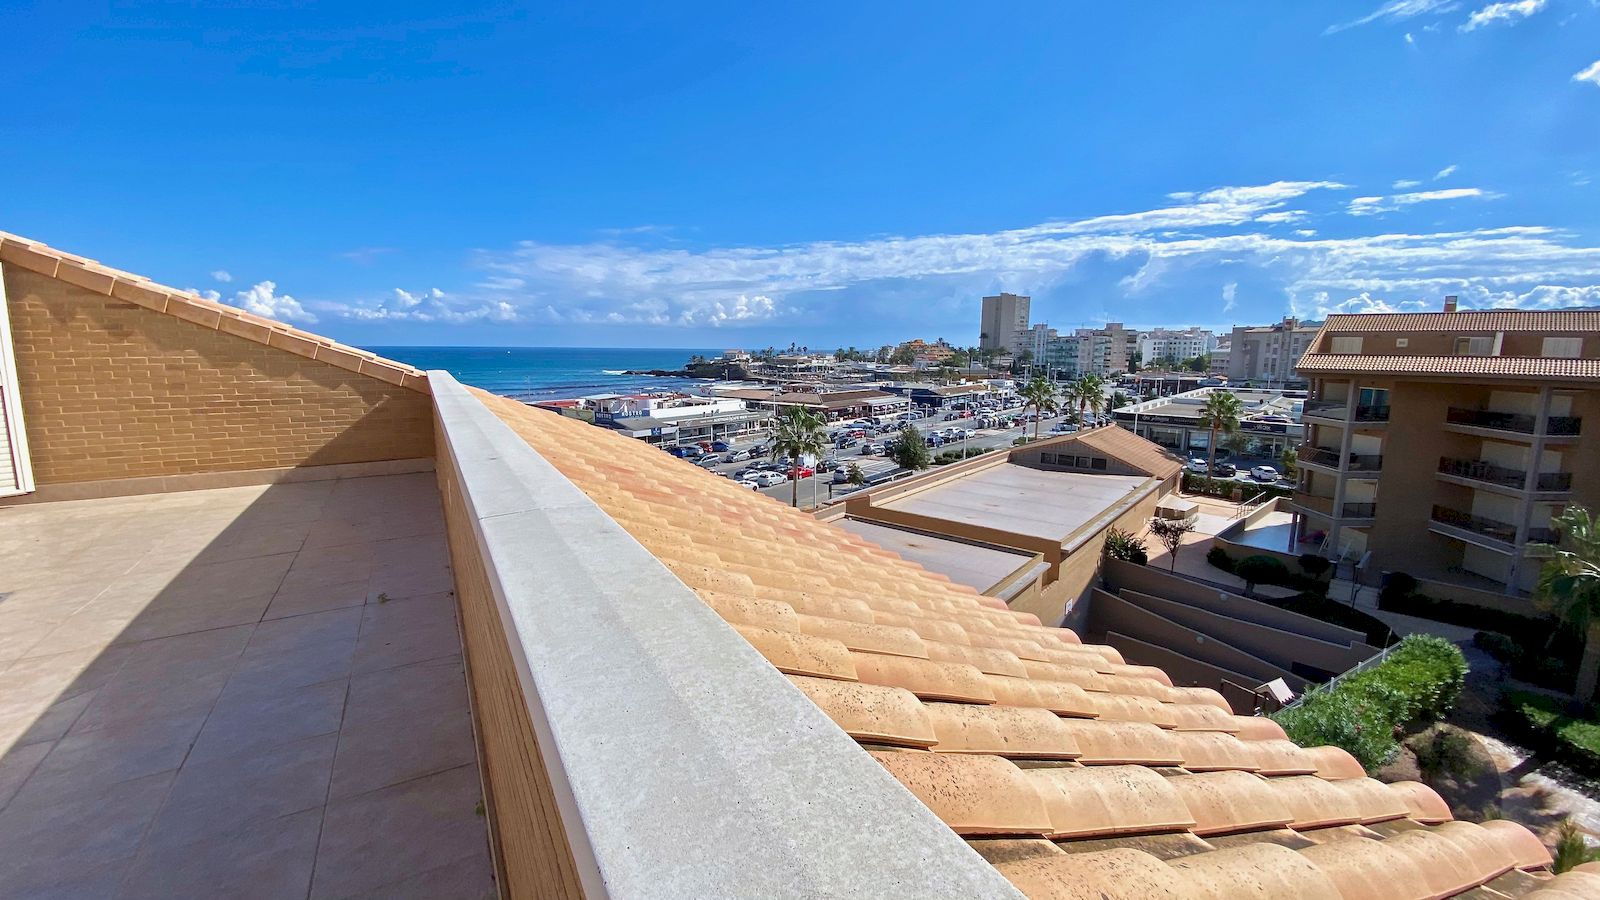 Duplex Penthouse Apartment for Sale in Playa del Arenal - Javea